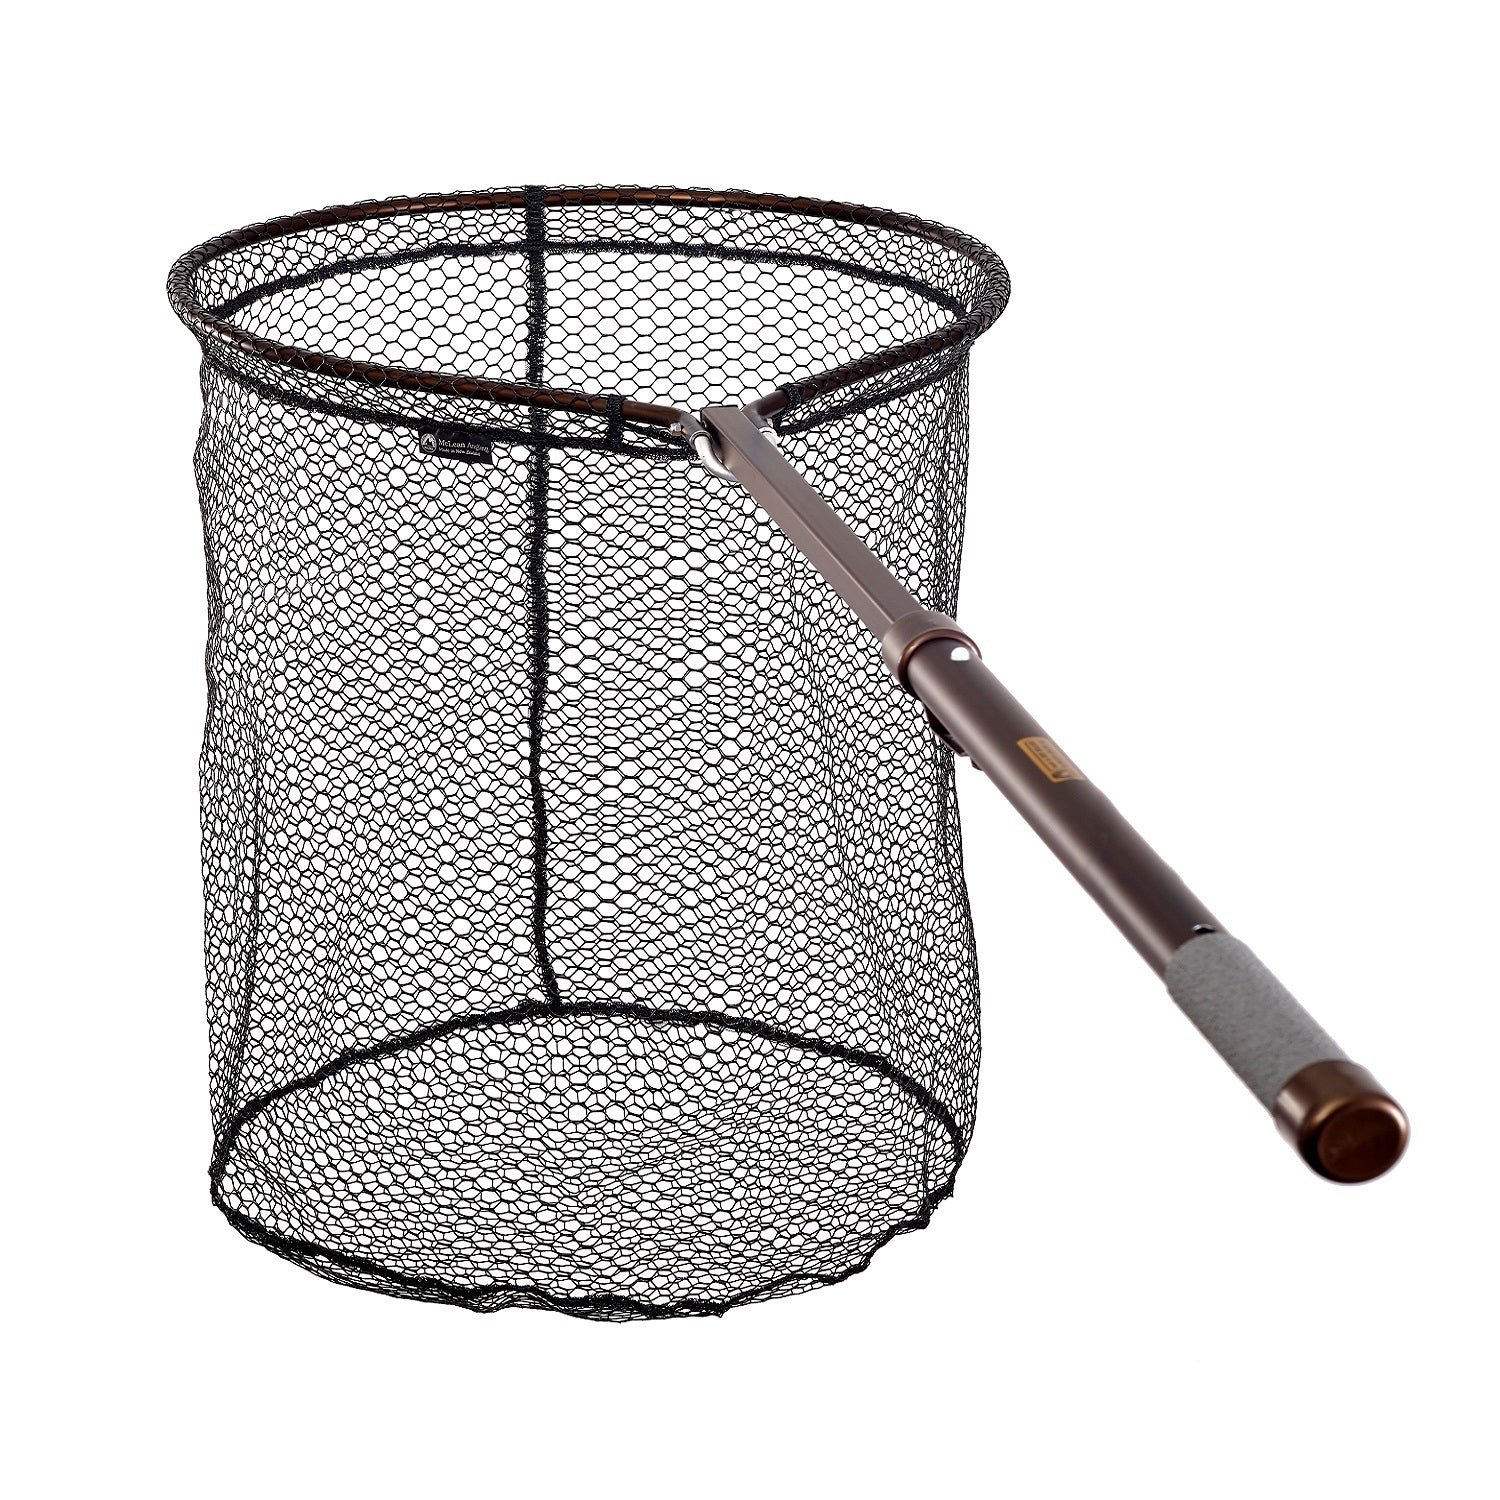 McLean Angling Hinged Locking Telescopic Weigh Net Rubber